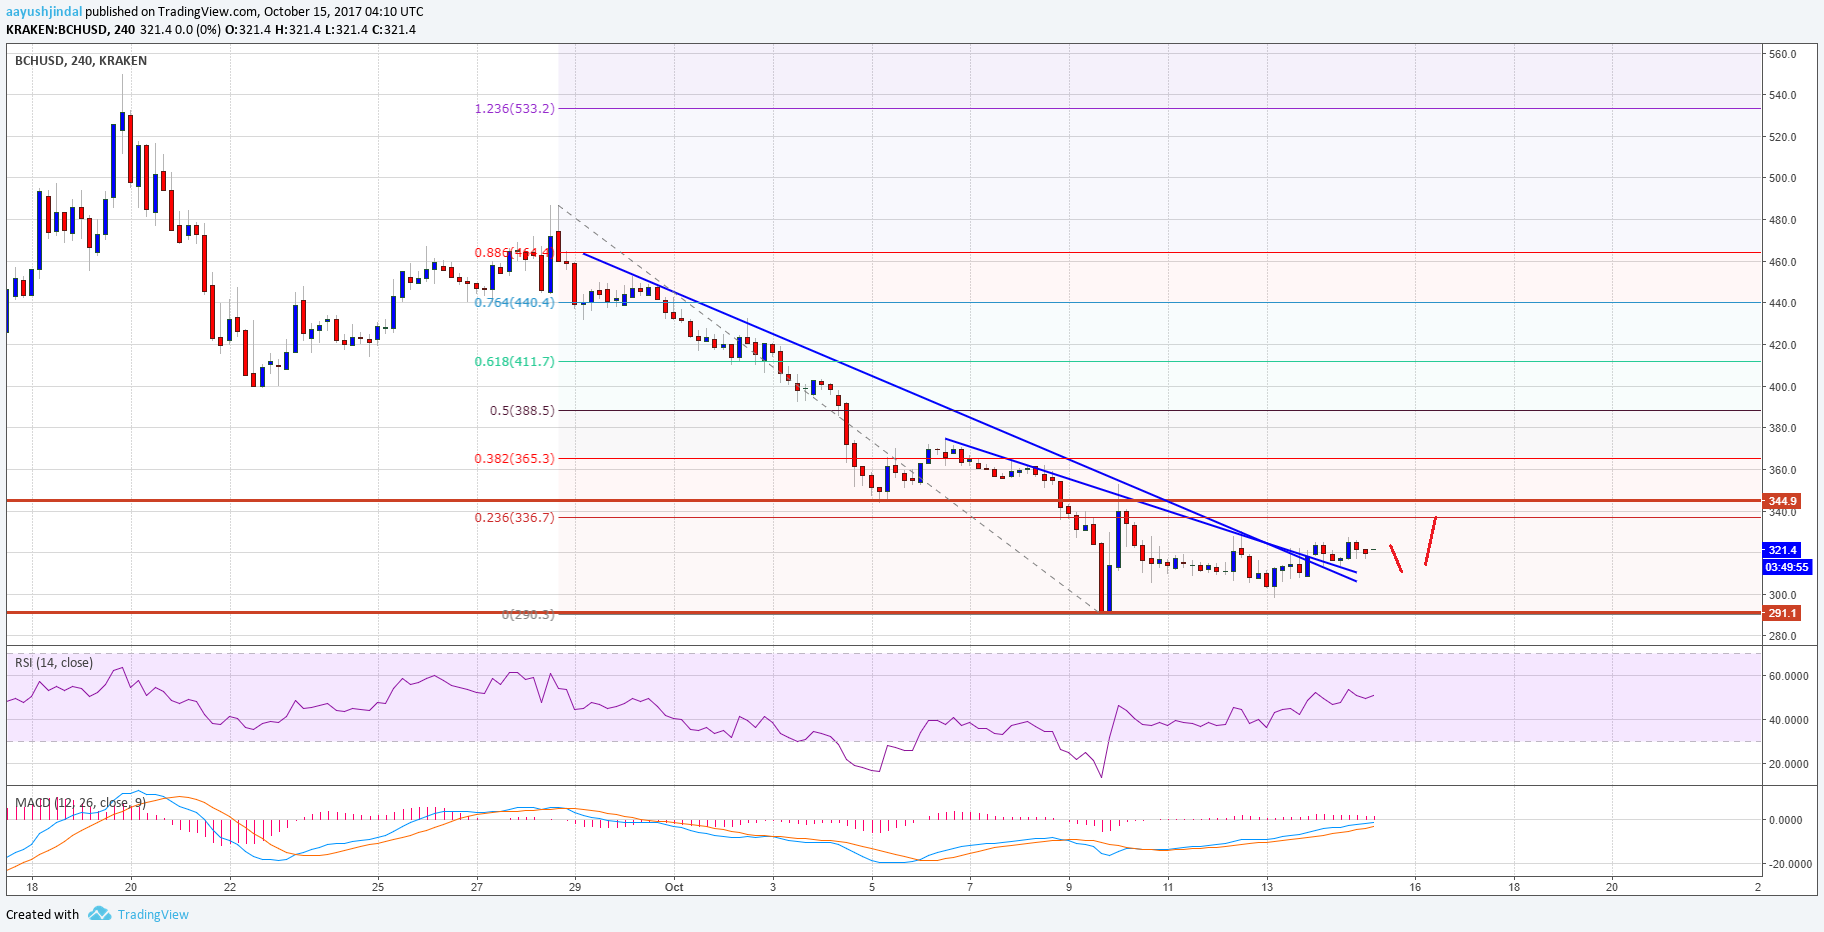 Bitcoin Cash Price Weekly Analysis – Can BCH/USD Gain Momentum?